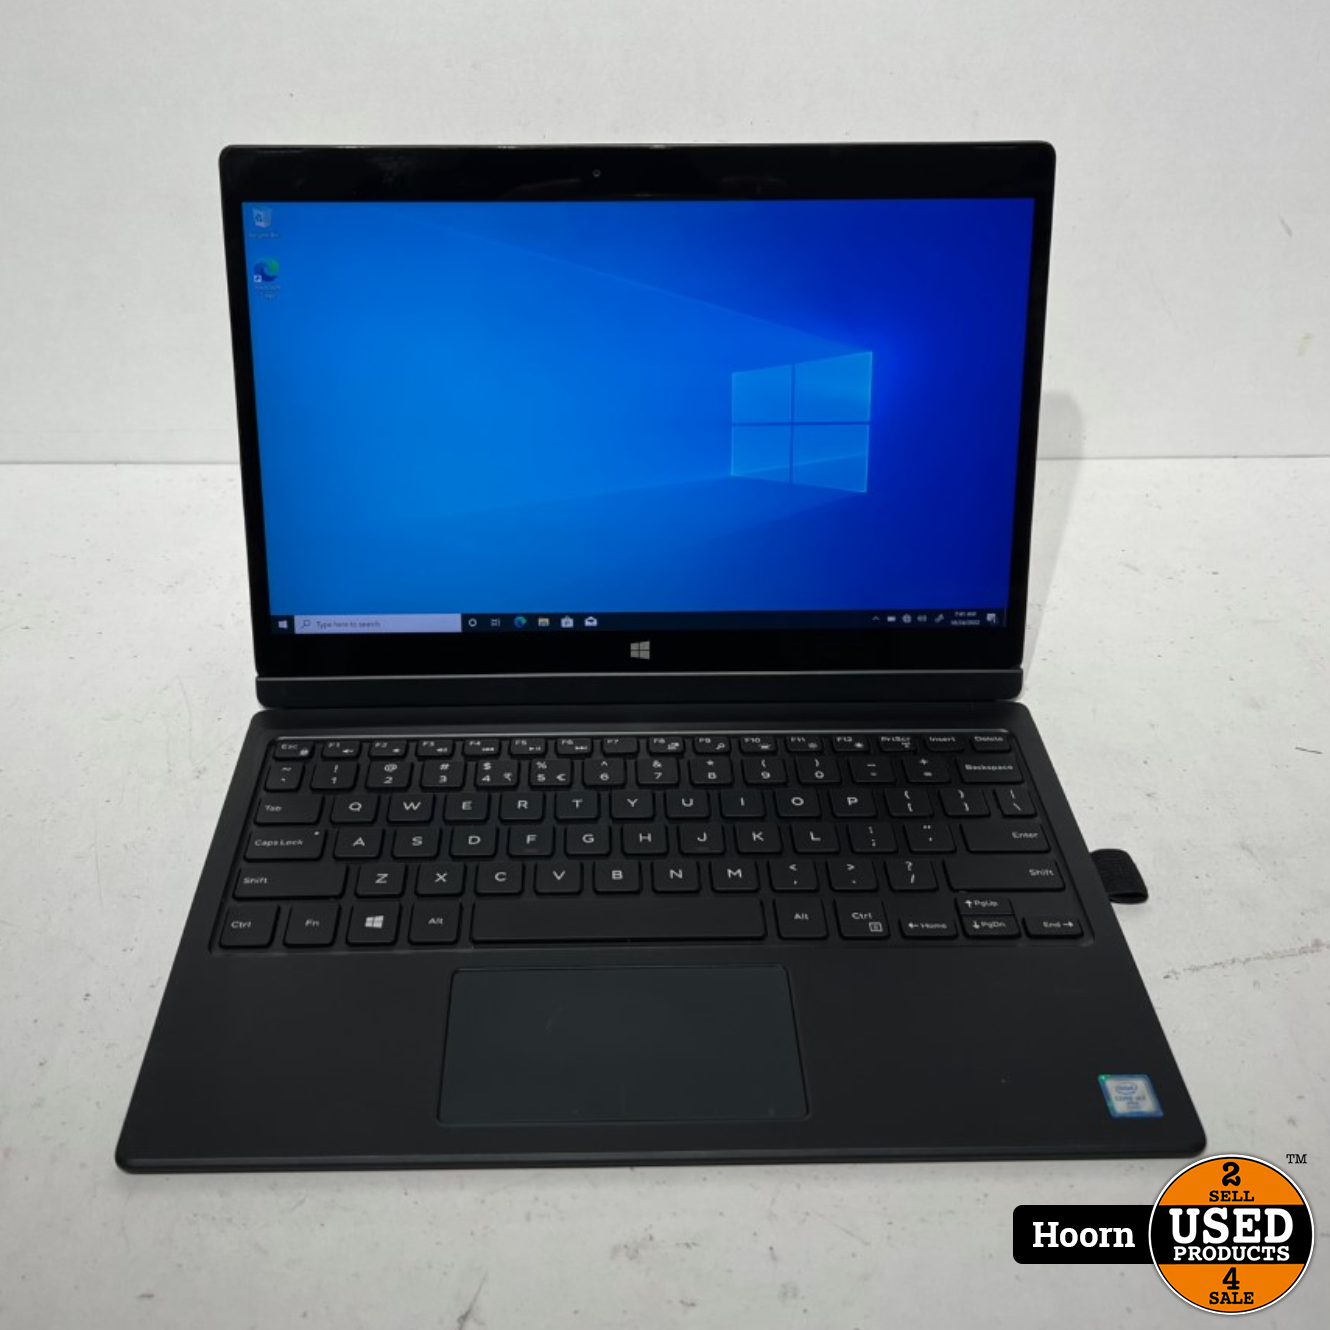 dell Dell Latitude 7275 K14M 2in1 Laptop Met Type Cover en Lader | Intel Core M7 | 8GB Ram | 256GB SSD - Products Hoorn